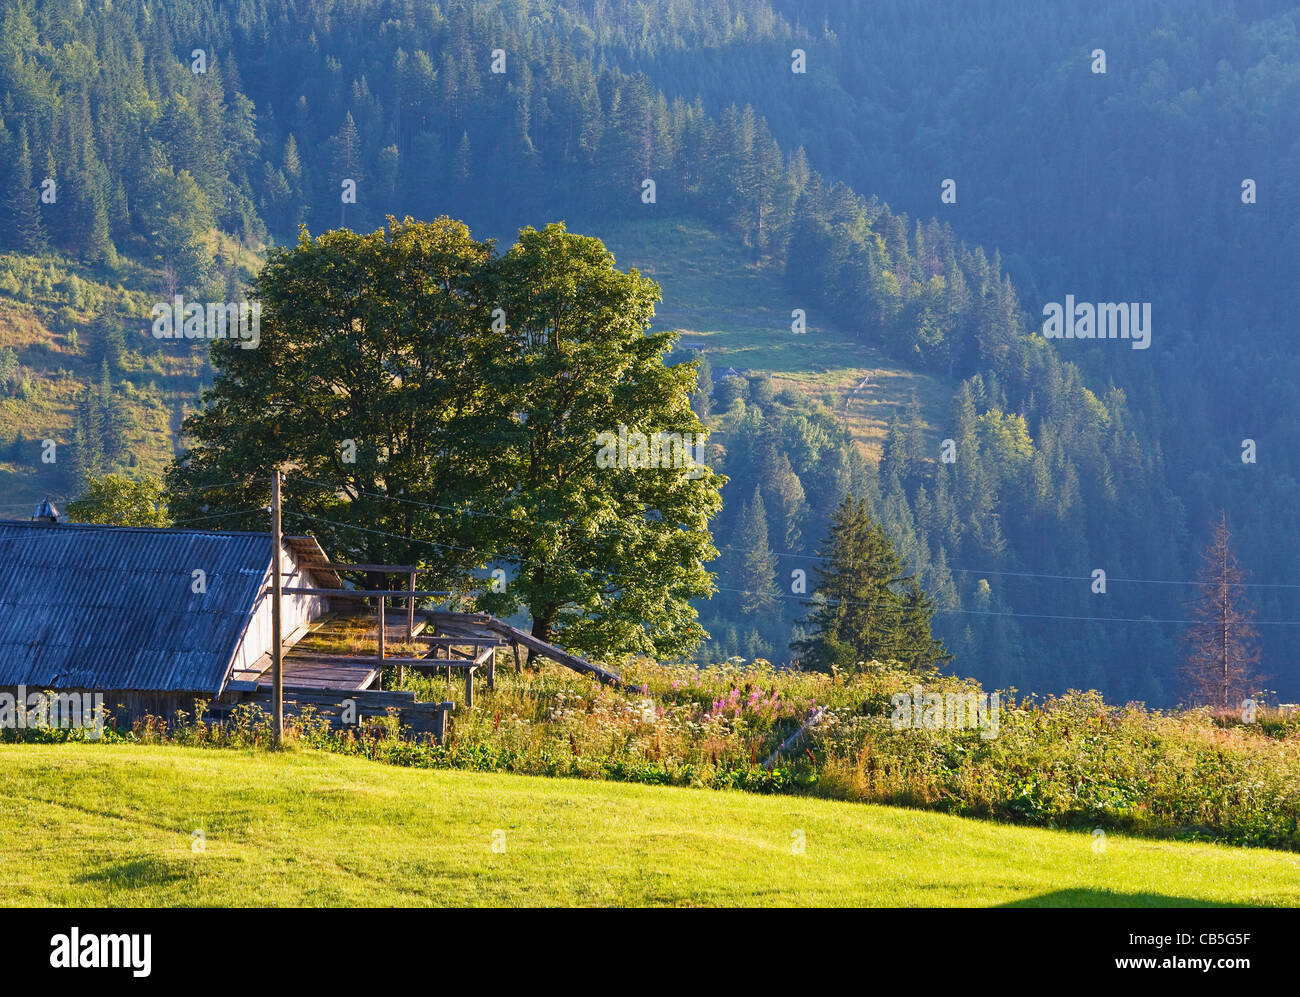 Summer mountain village landscape with shed on hill slope Stock Photo